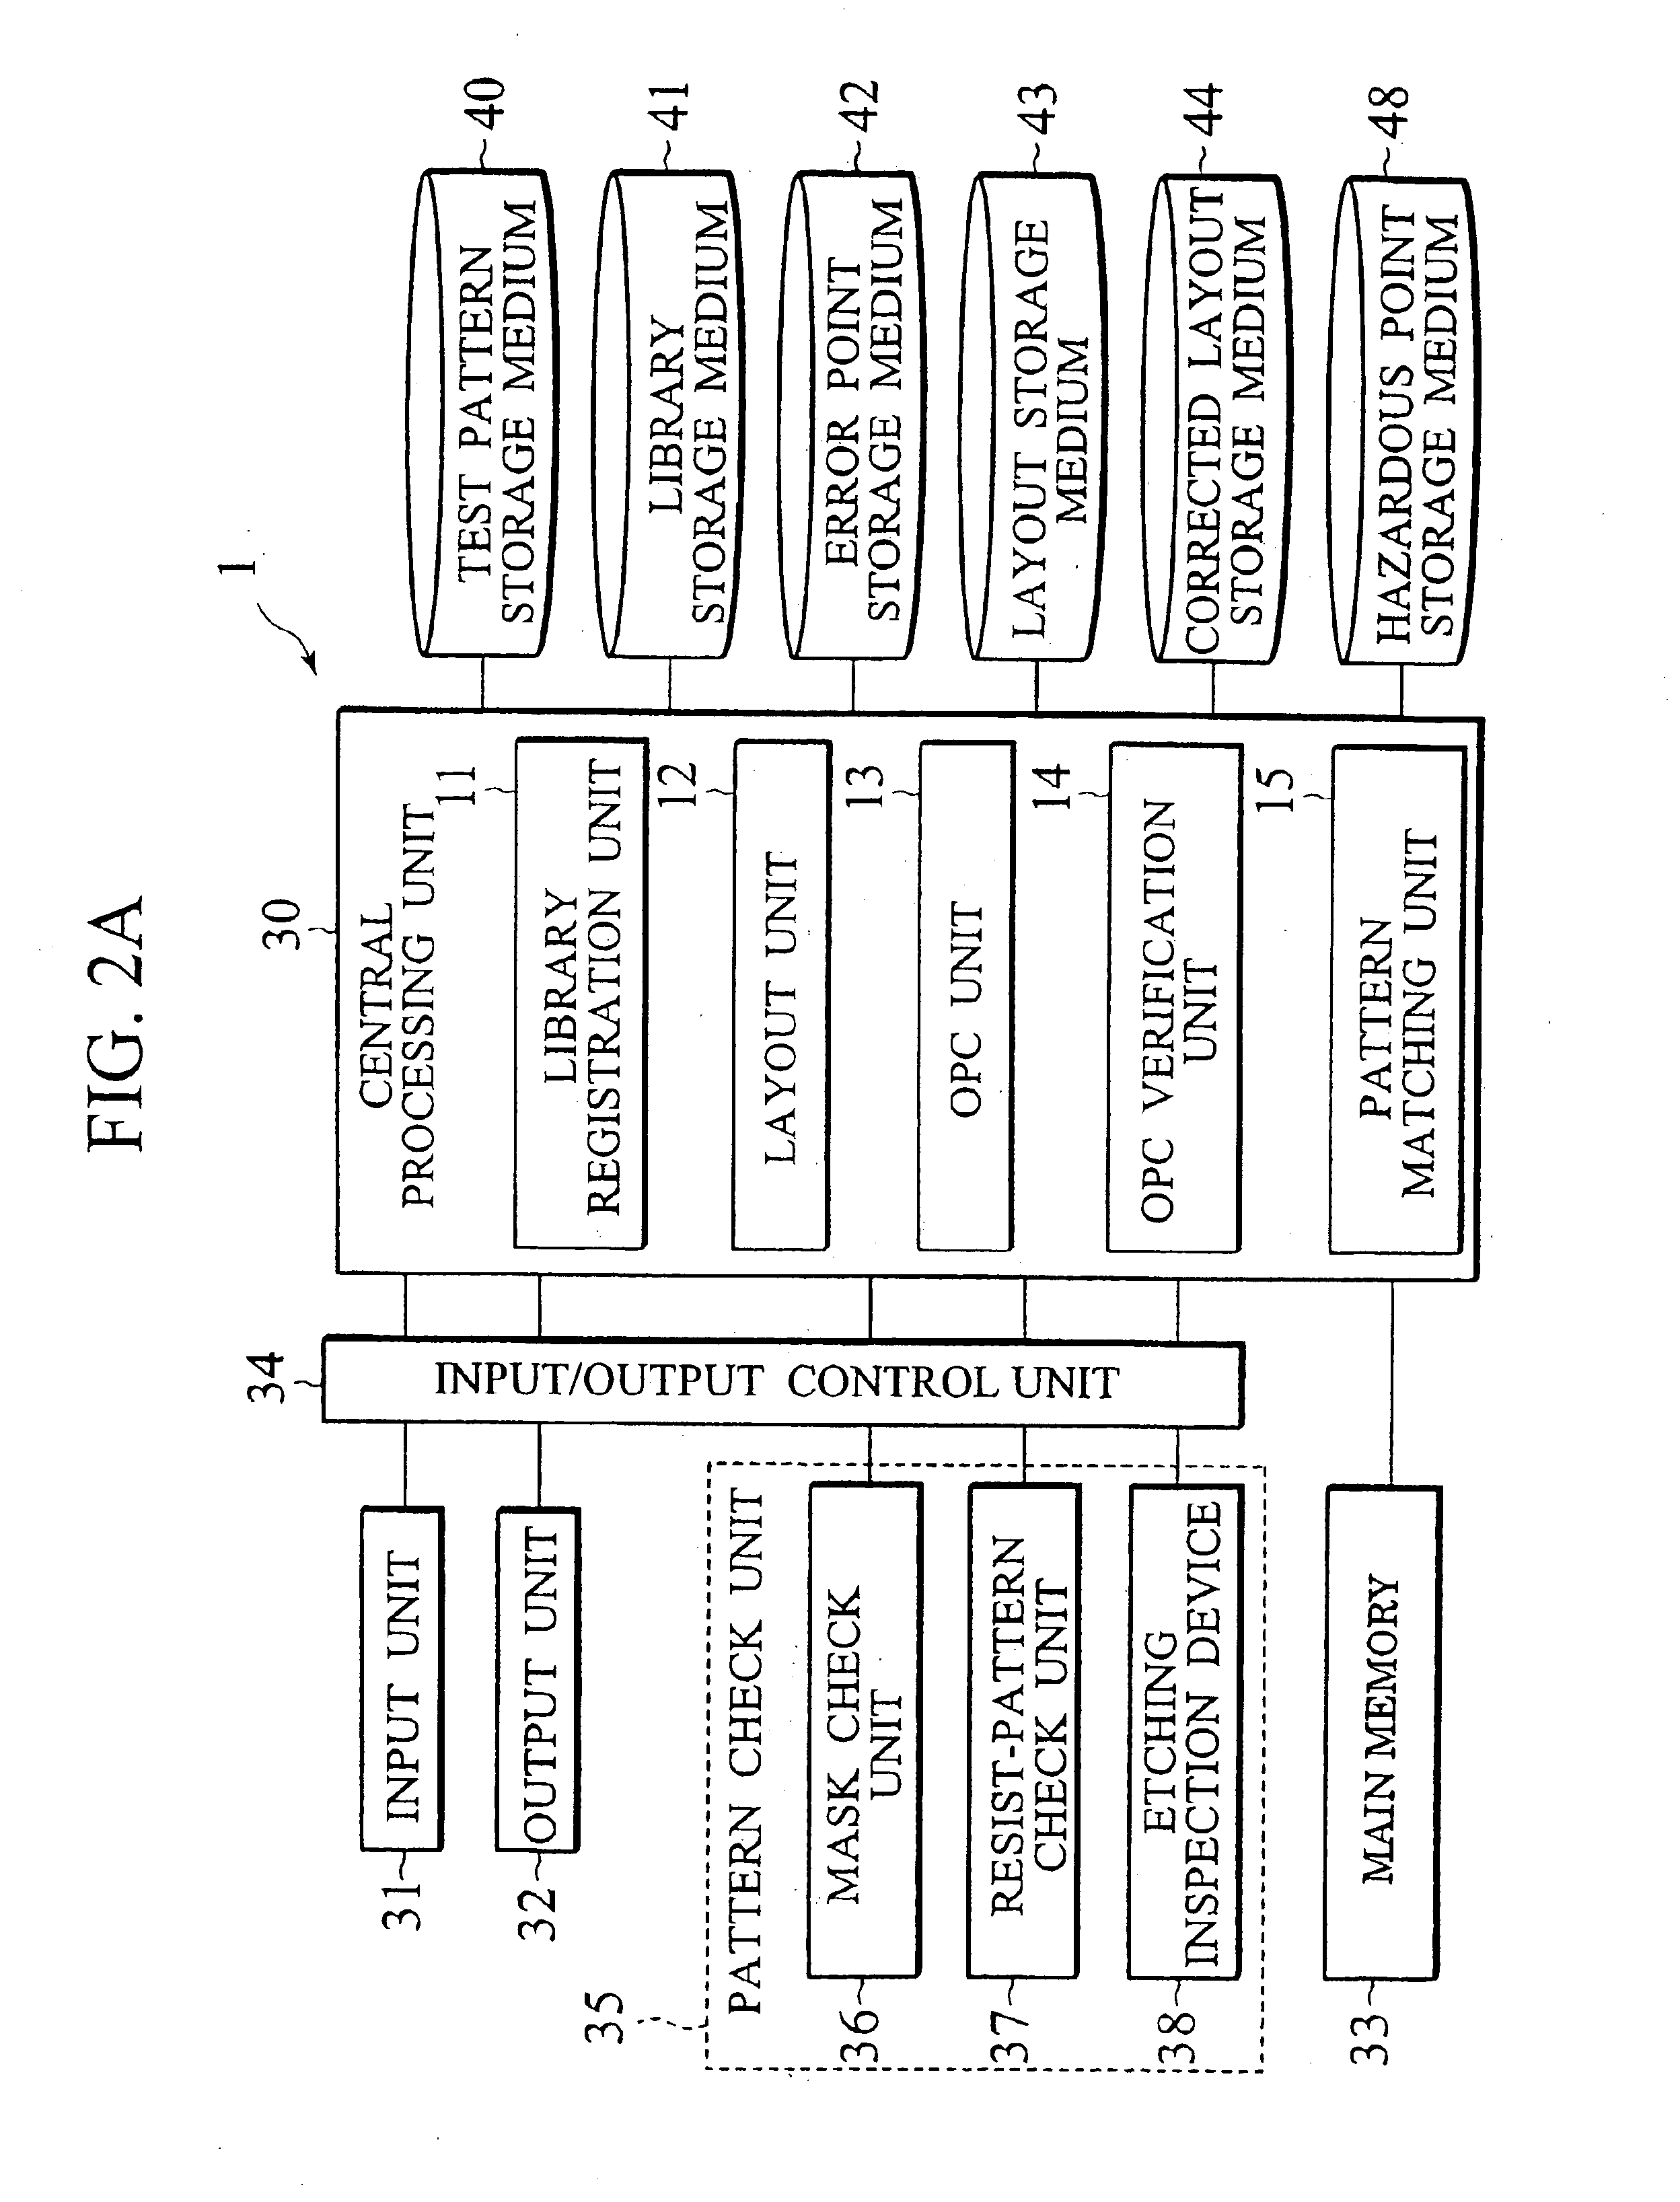 Method and system for optical proximity correction